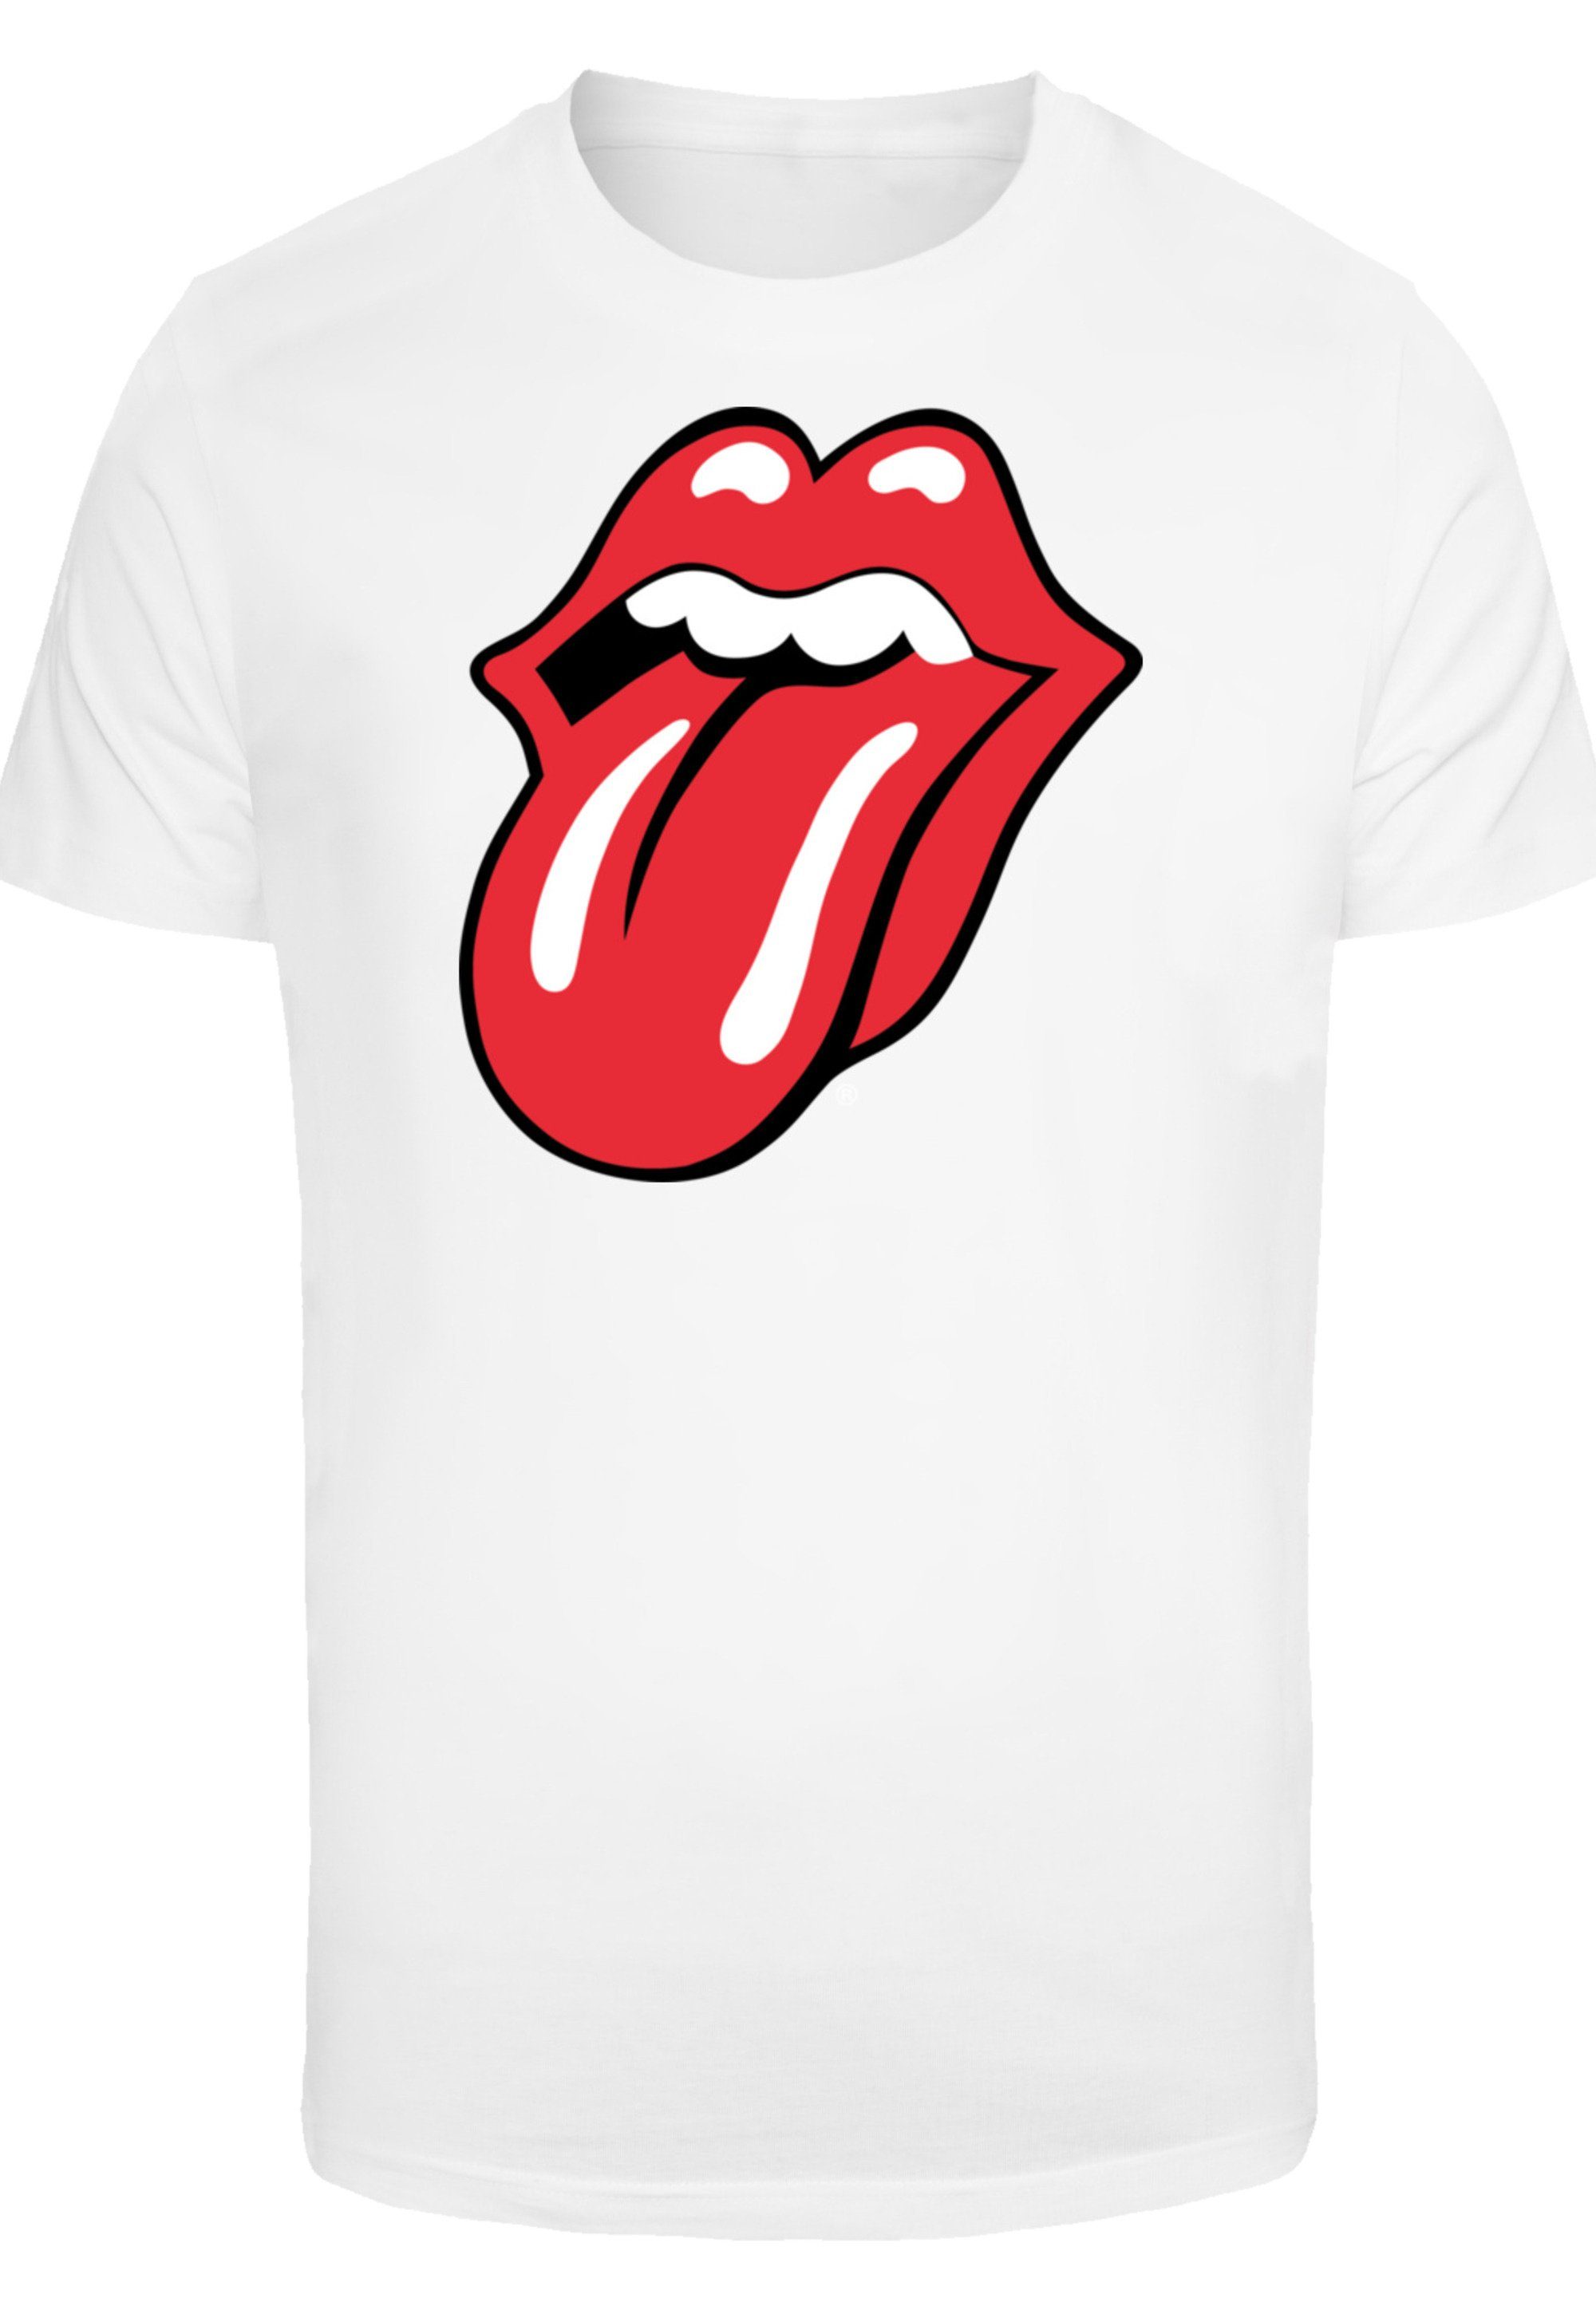 F4NT4STIC T-Shirt The Stones Print Rote Zunge Rolling weiß